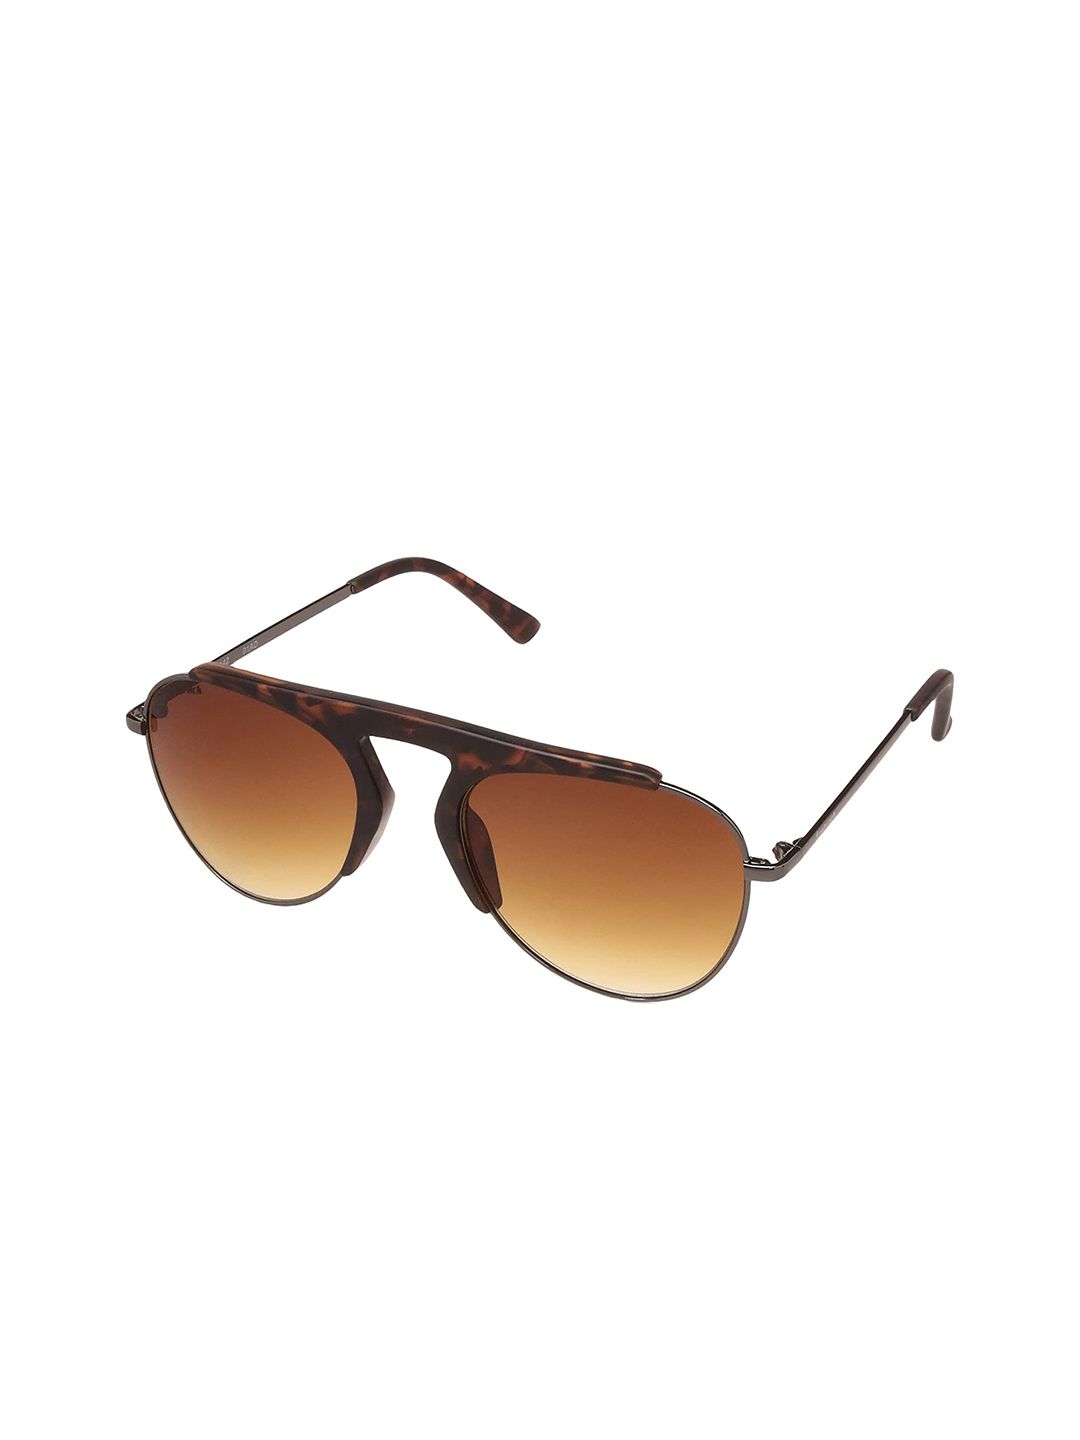 Fastrack Unisex Brown Lens & Brown Aviator Sunglasses with UV Protected Lens C061BR2 Price in India